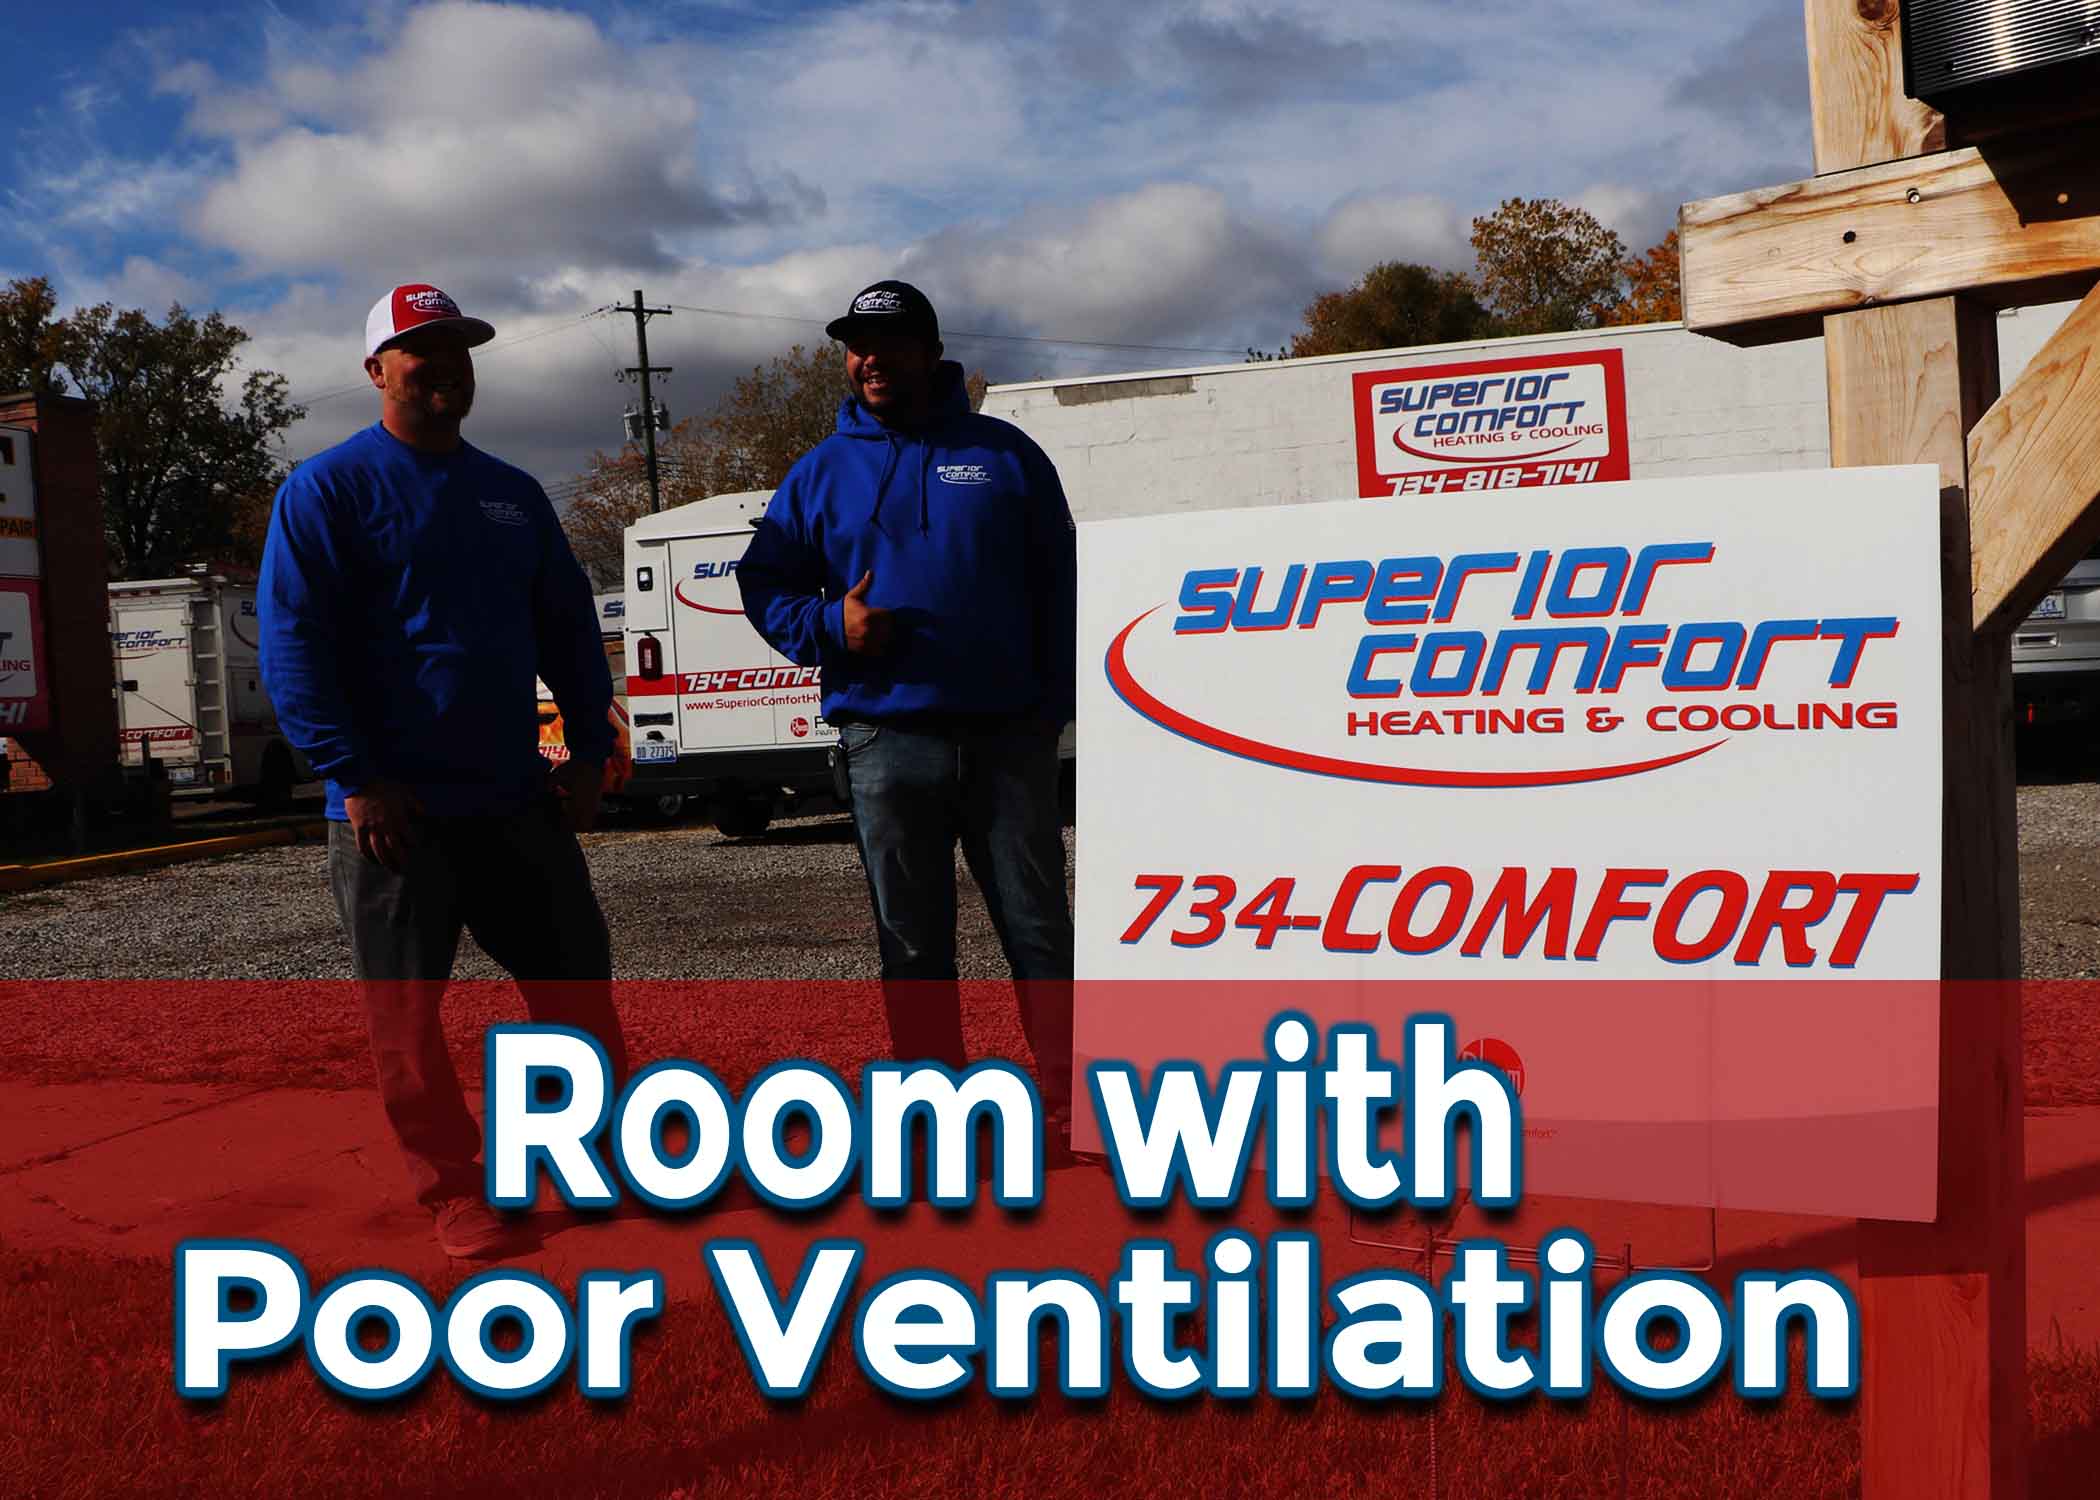 How to Treat a Small Room with Poor Ventilation